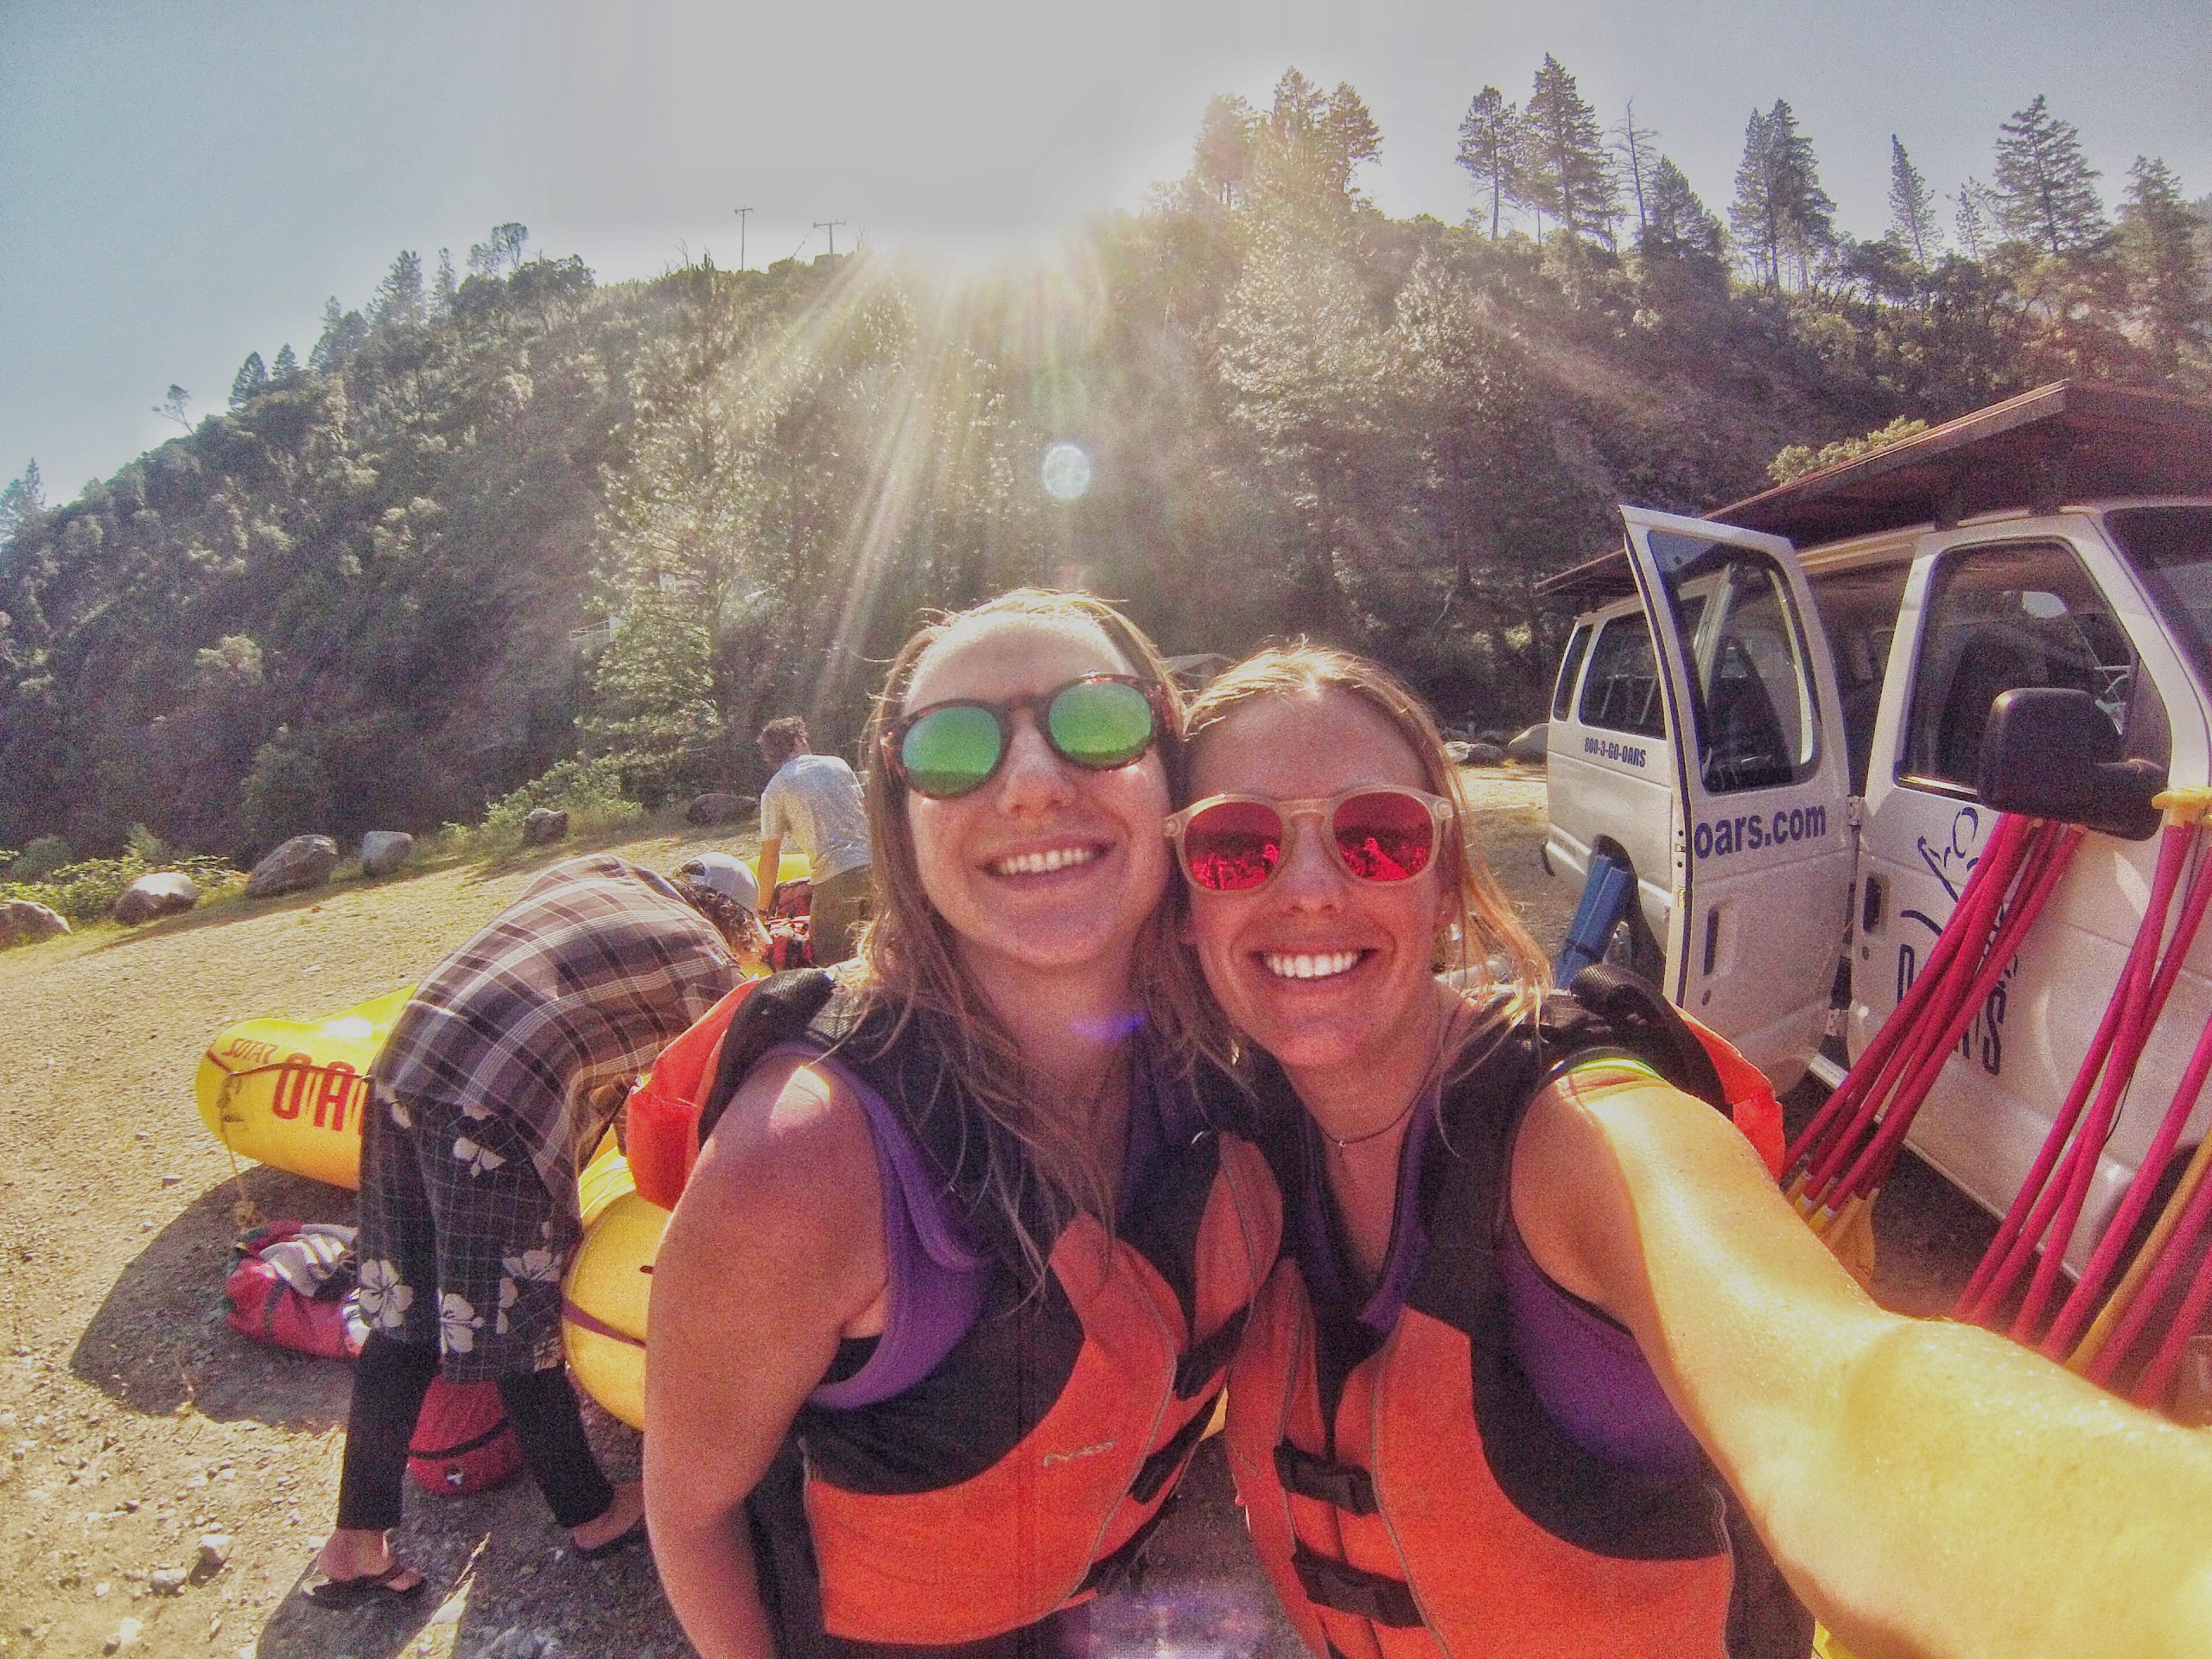 7 Reasons to Go Whitewater Rafting Right Now